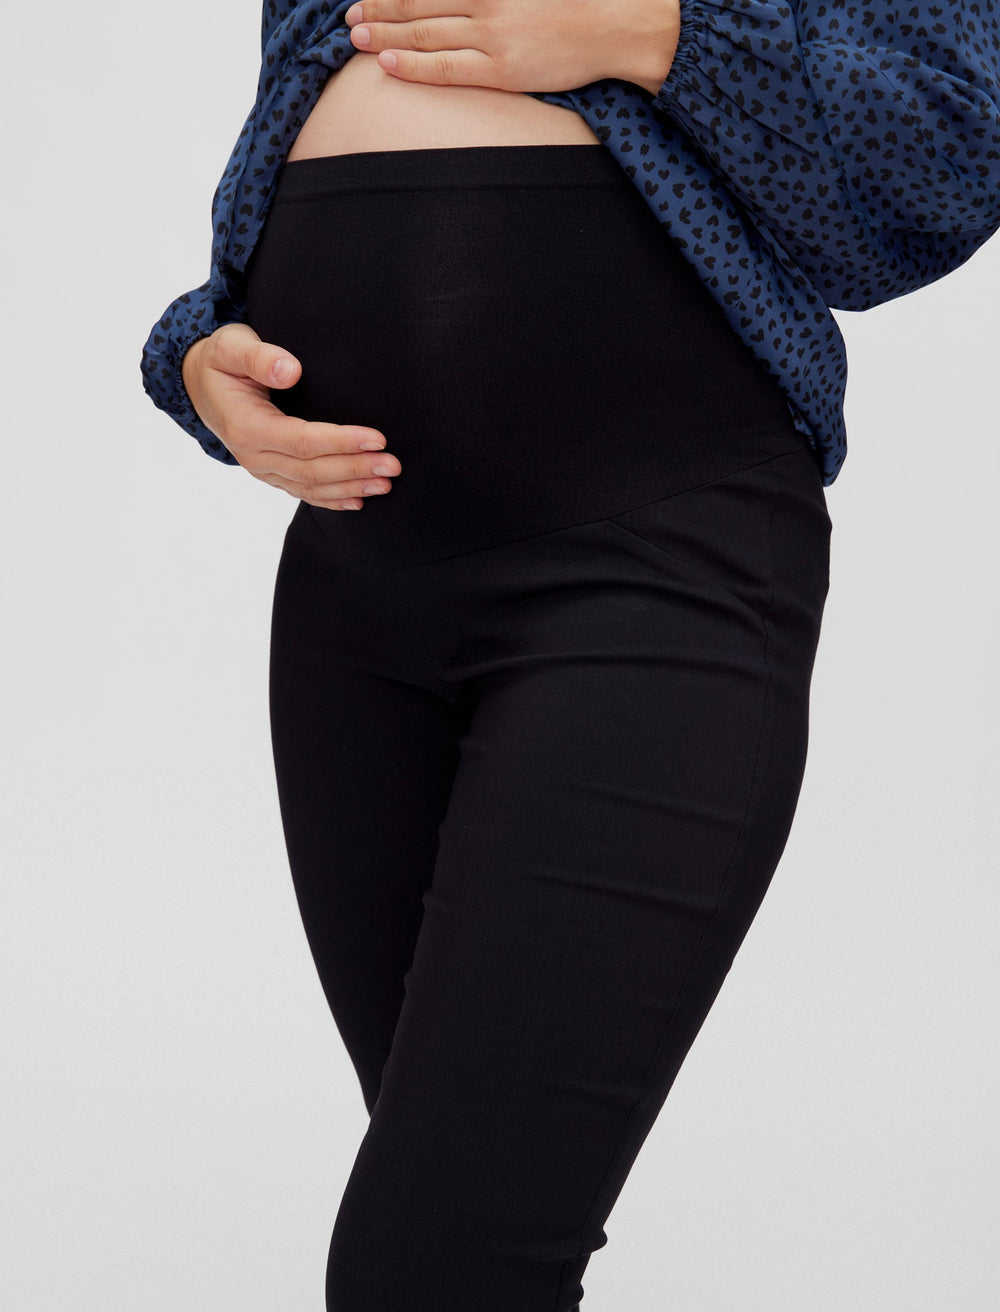 What Maternity Workout Clothes Do I Need?. Nike IN